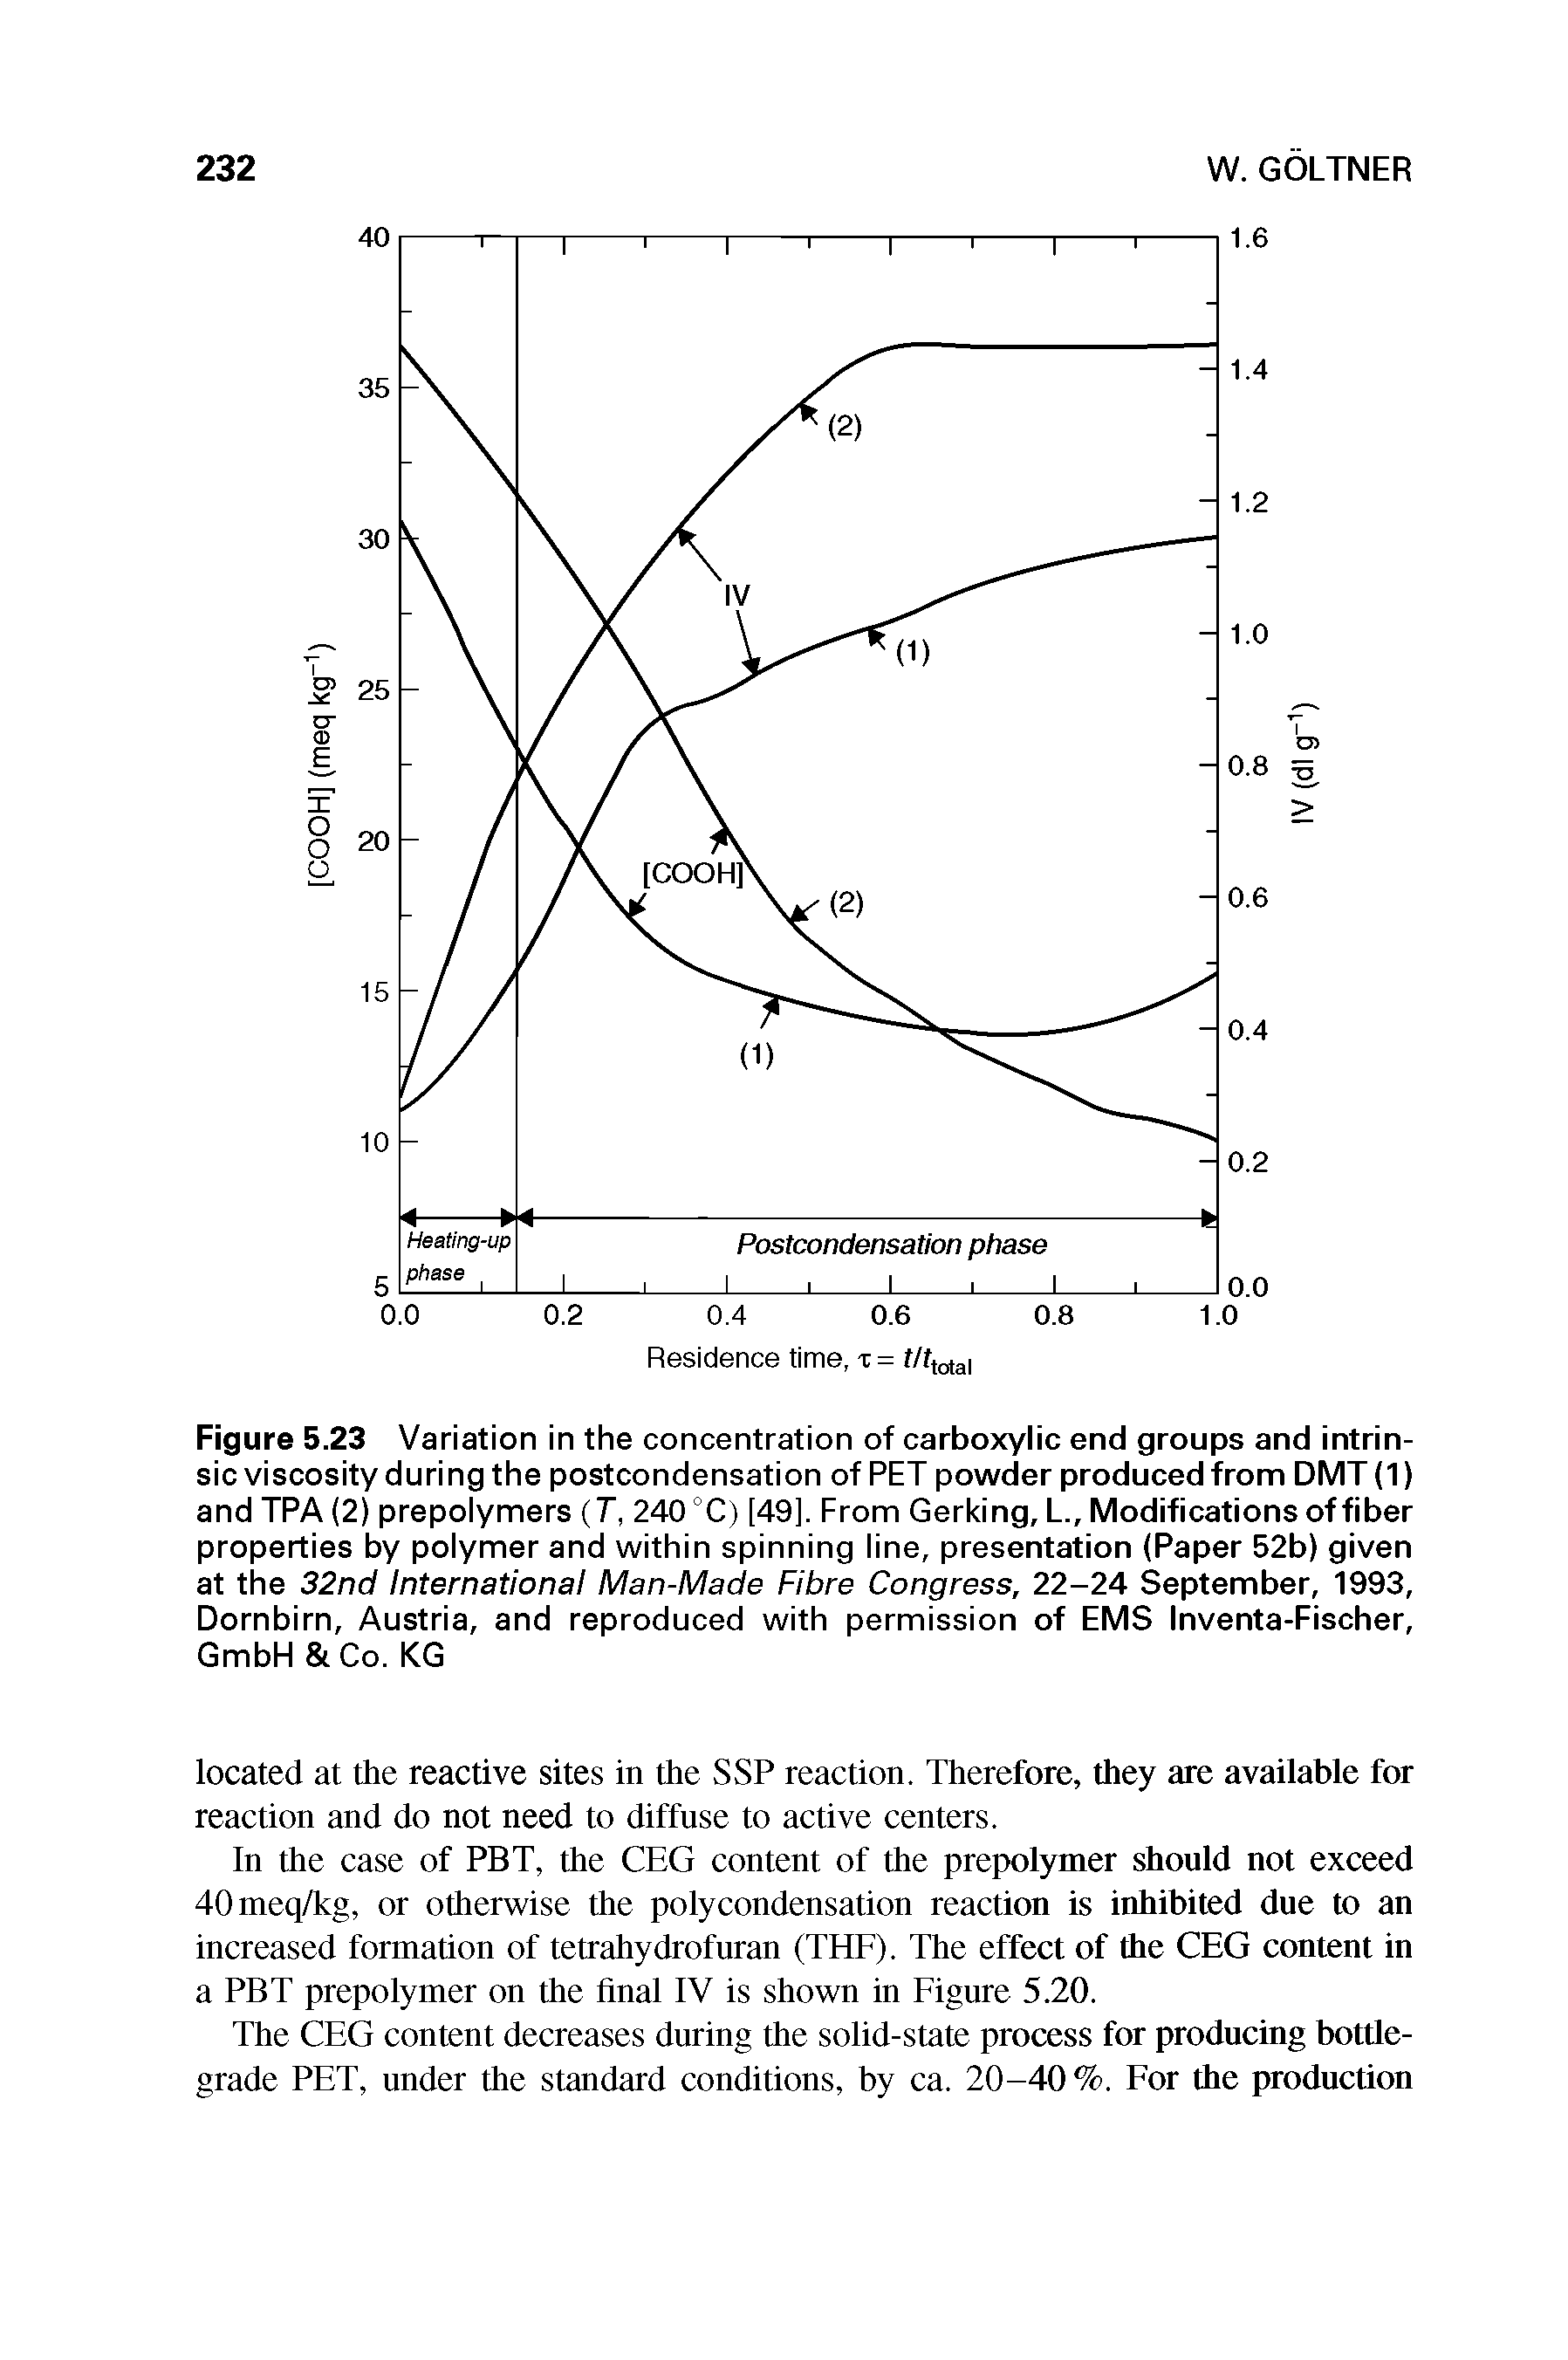 Figure 5.23 Variation in the concentration of carboxylic end groups and intrinsic viscosity during the postcondensation of PET powder produced from DMT (1) and TPA (2) prepolymers (7, 240 °C) [49]. From Gerking, L., Modifications of fiber properties by polymer and within spinning line, presentation (Paper 52b) given at the 32nd International Man-Made Fibre Congress, 22-24 September, 1993, Dornbirn, Austria, and reproduced with permission of EMS Inventa-Fischer, GmbH Co. KG...